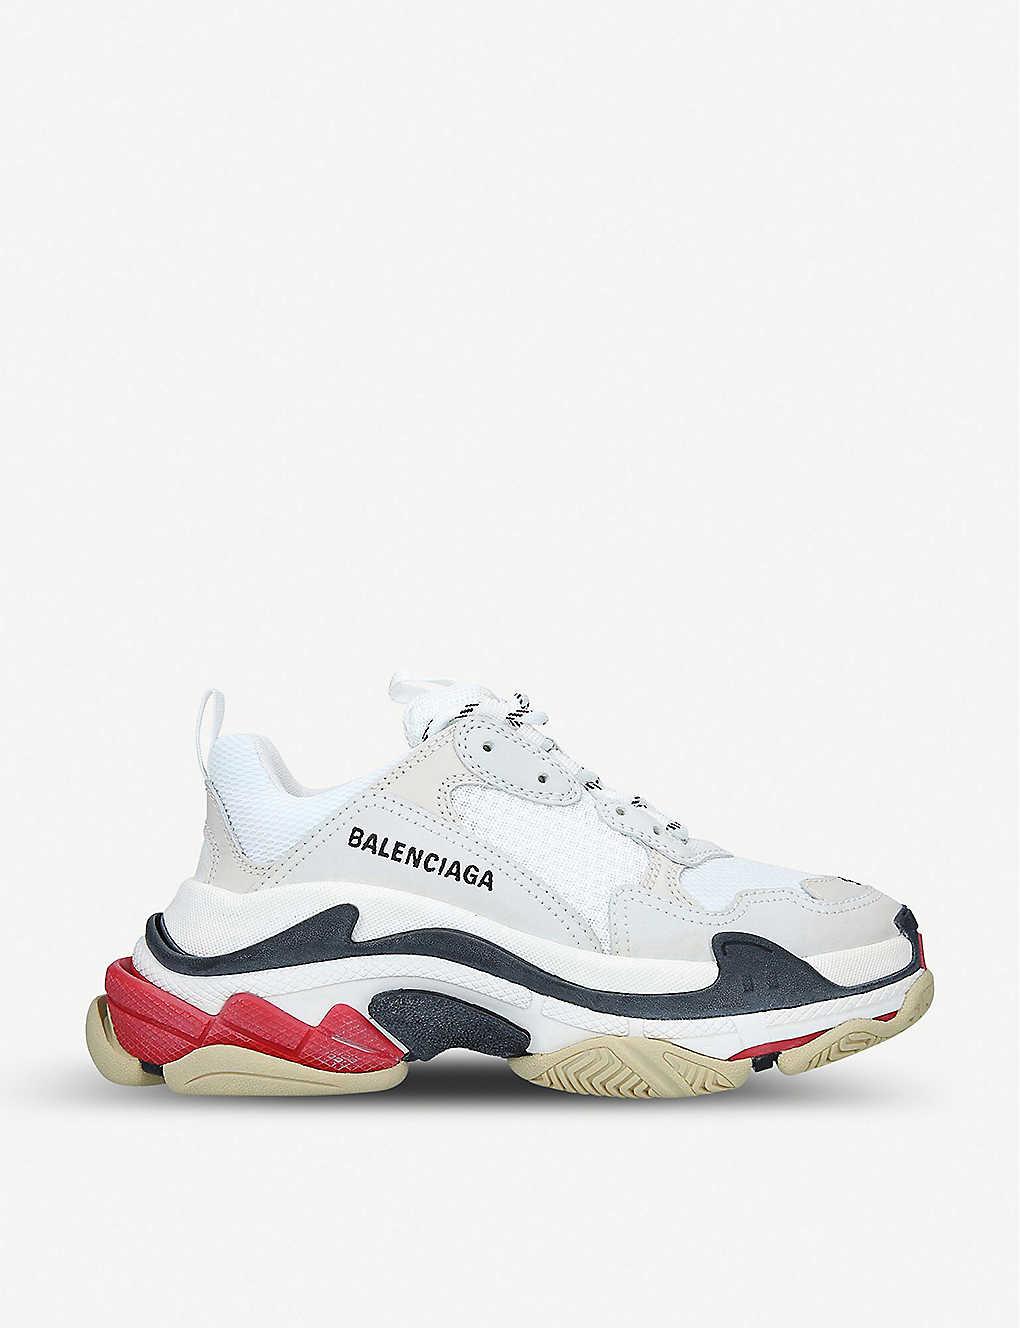 Balenciaga Triple S Sneakers In Mesh-leather And Nubuck in White - Save ...